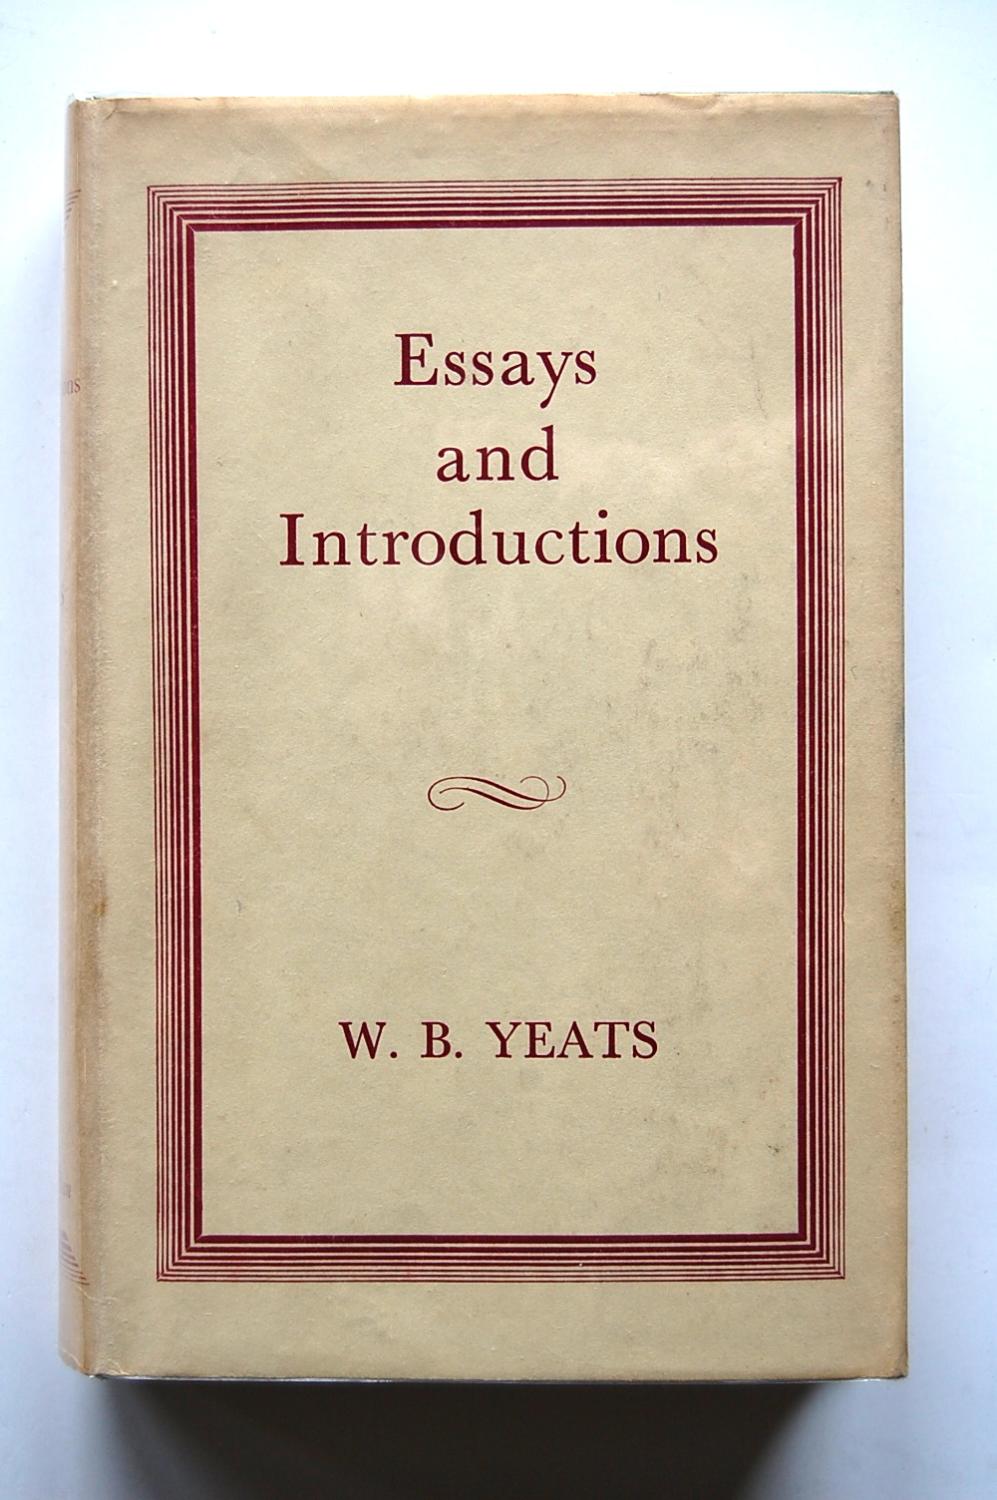 yeats essays and introductions pdf